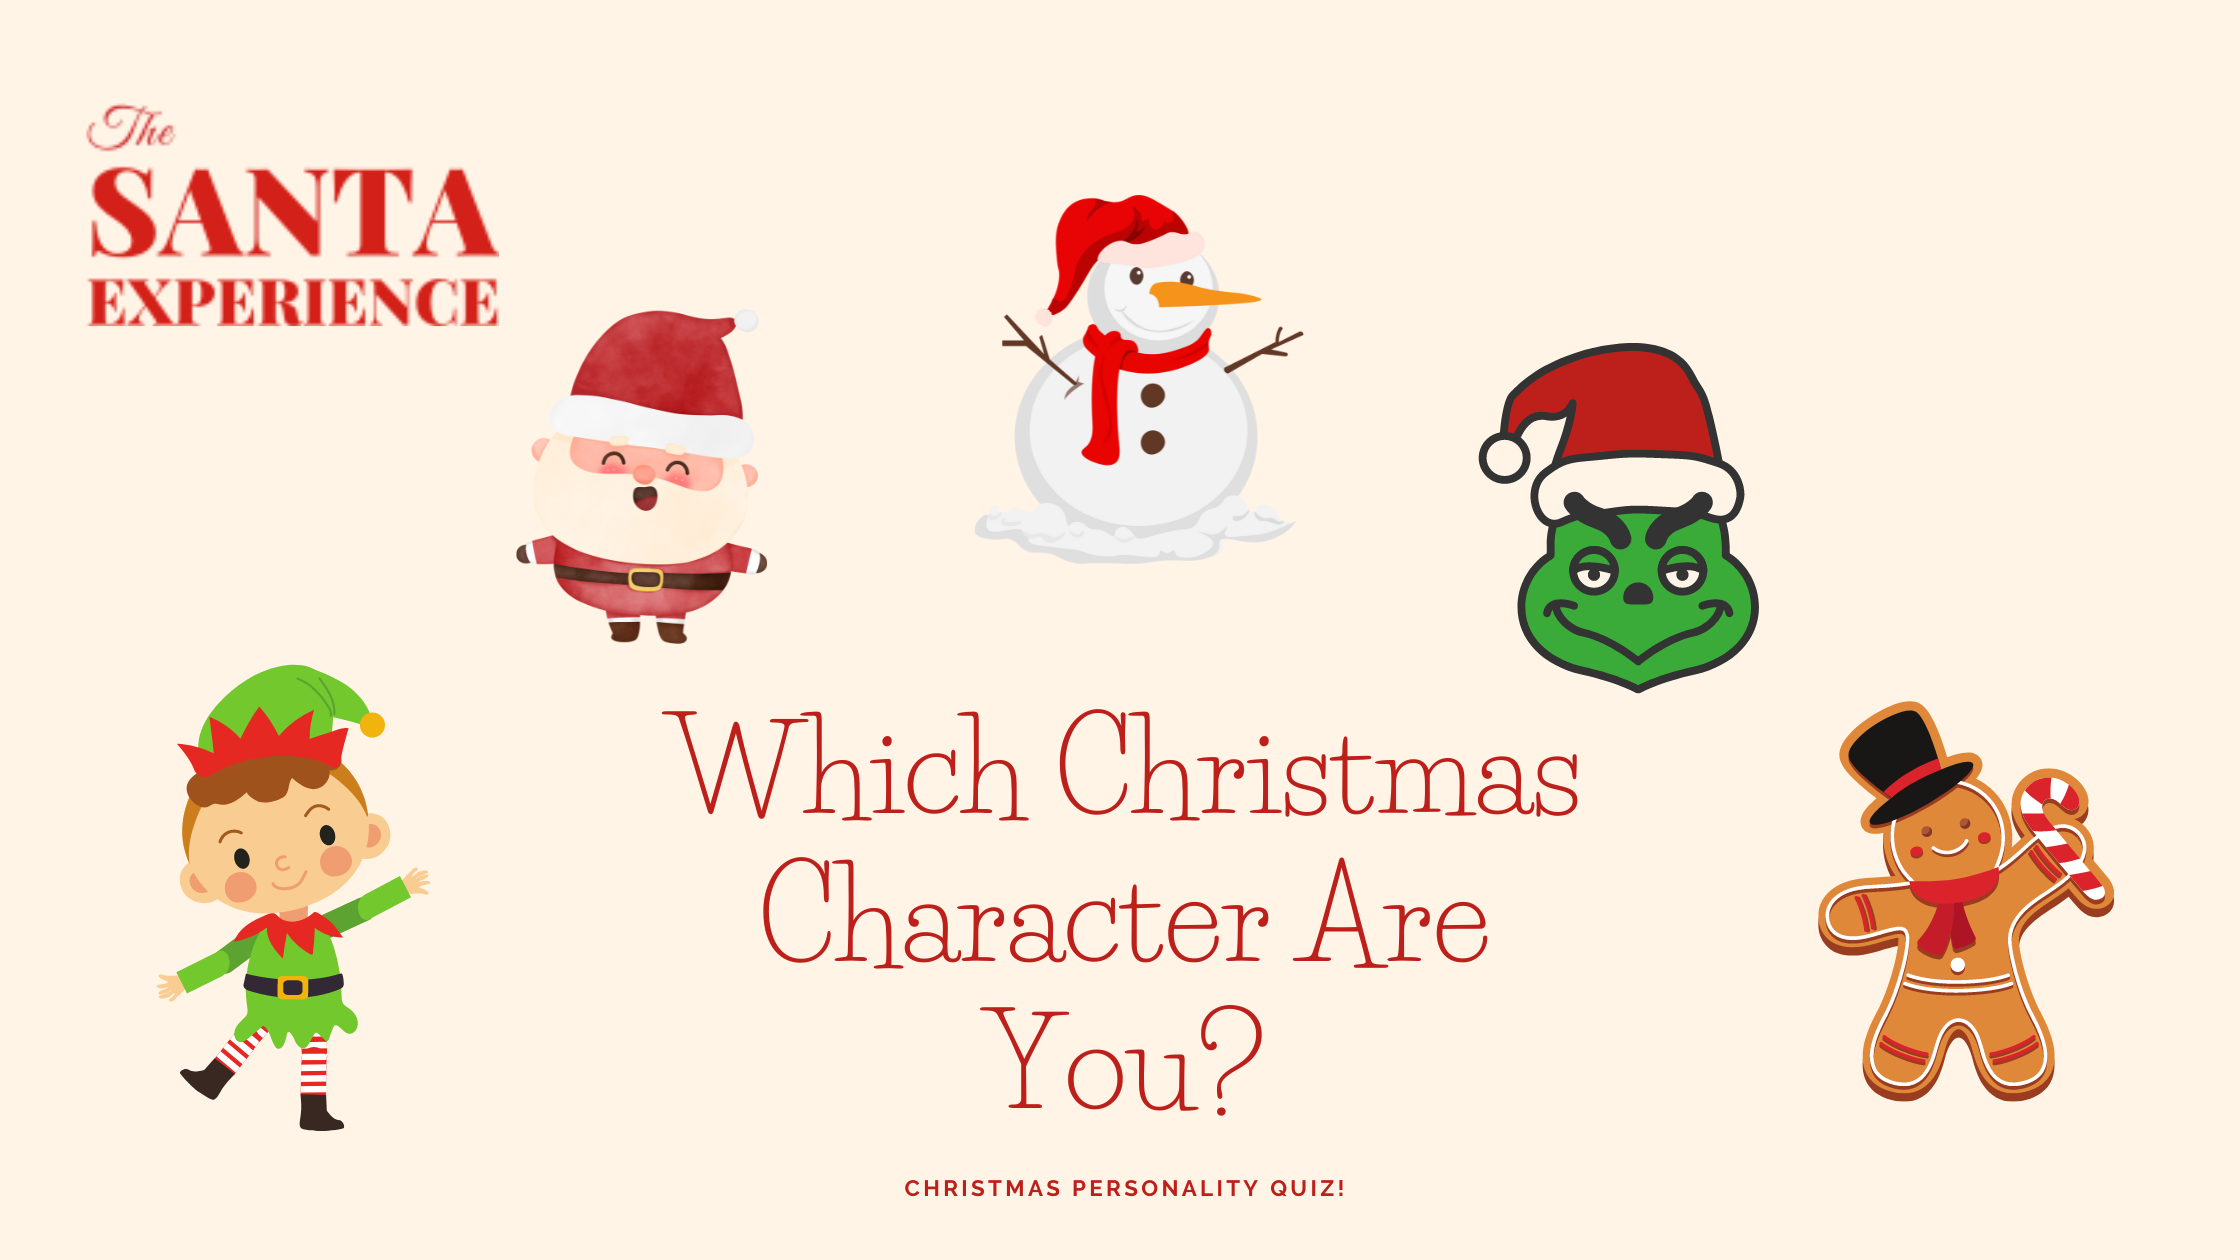 What Christmas Character Are You? Christmas Personality Quiz!